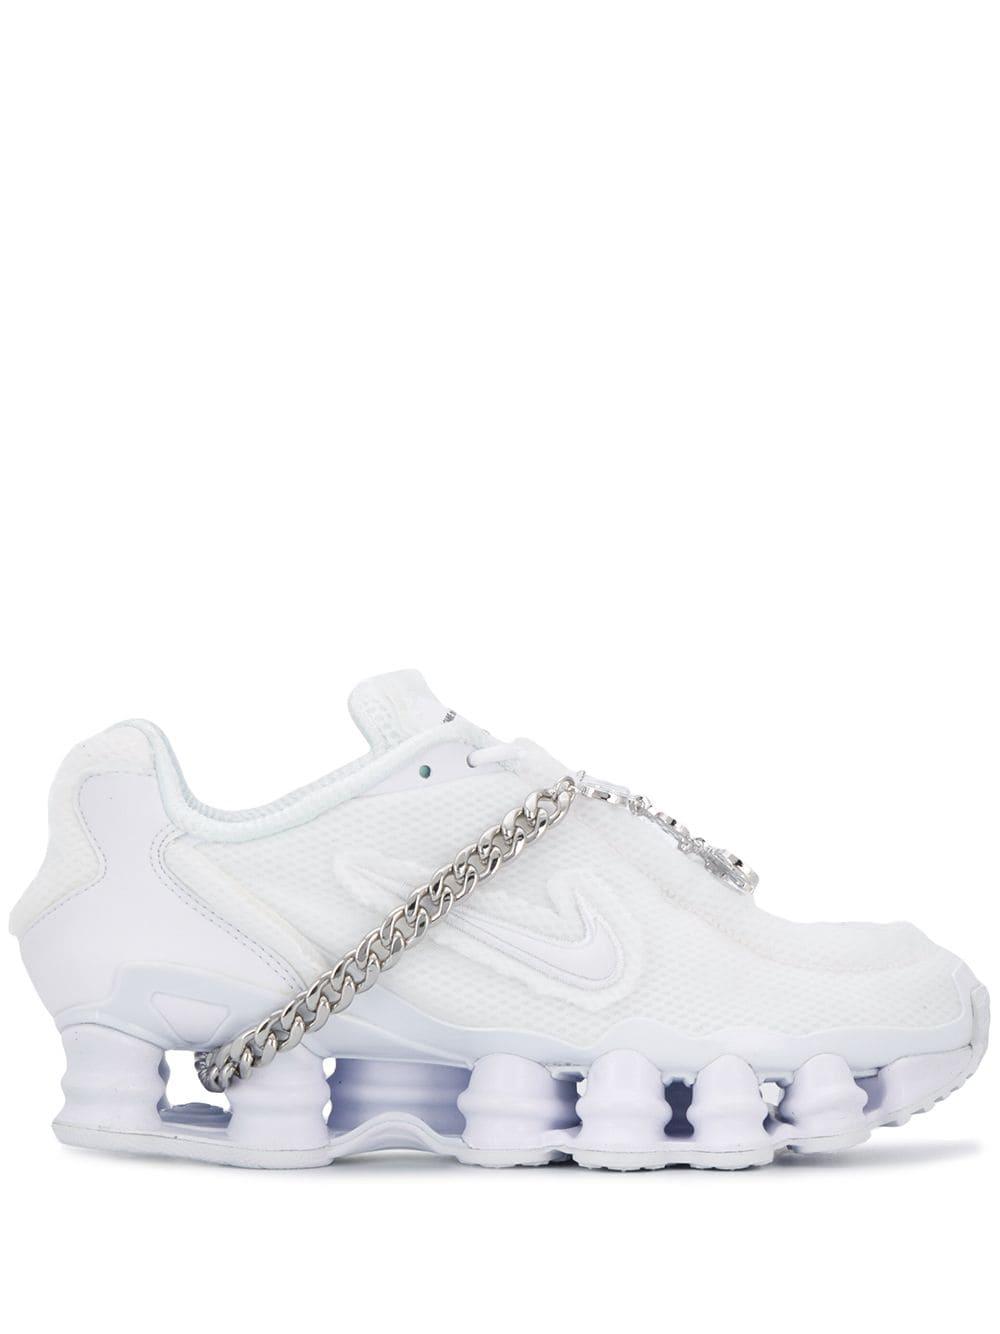 Comme des Garçons Leather X Nike Shox Tl Sneakers in White - Lyst